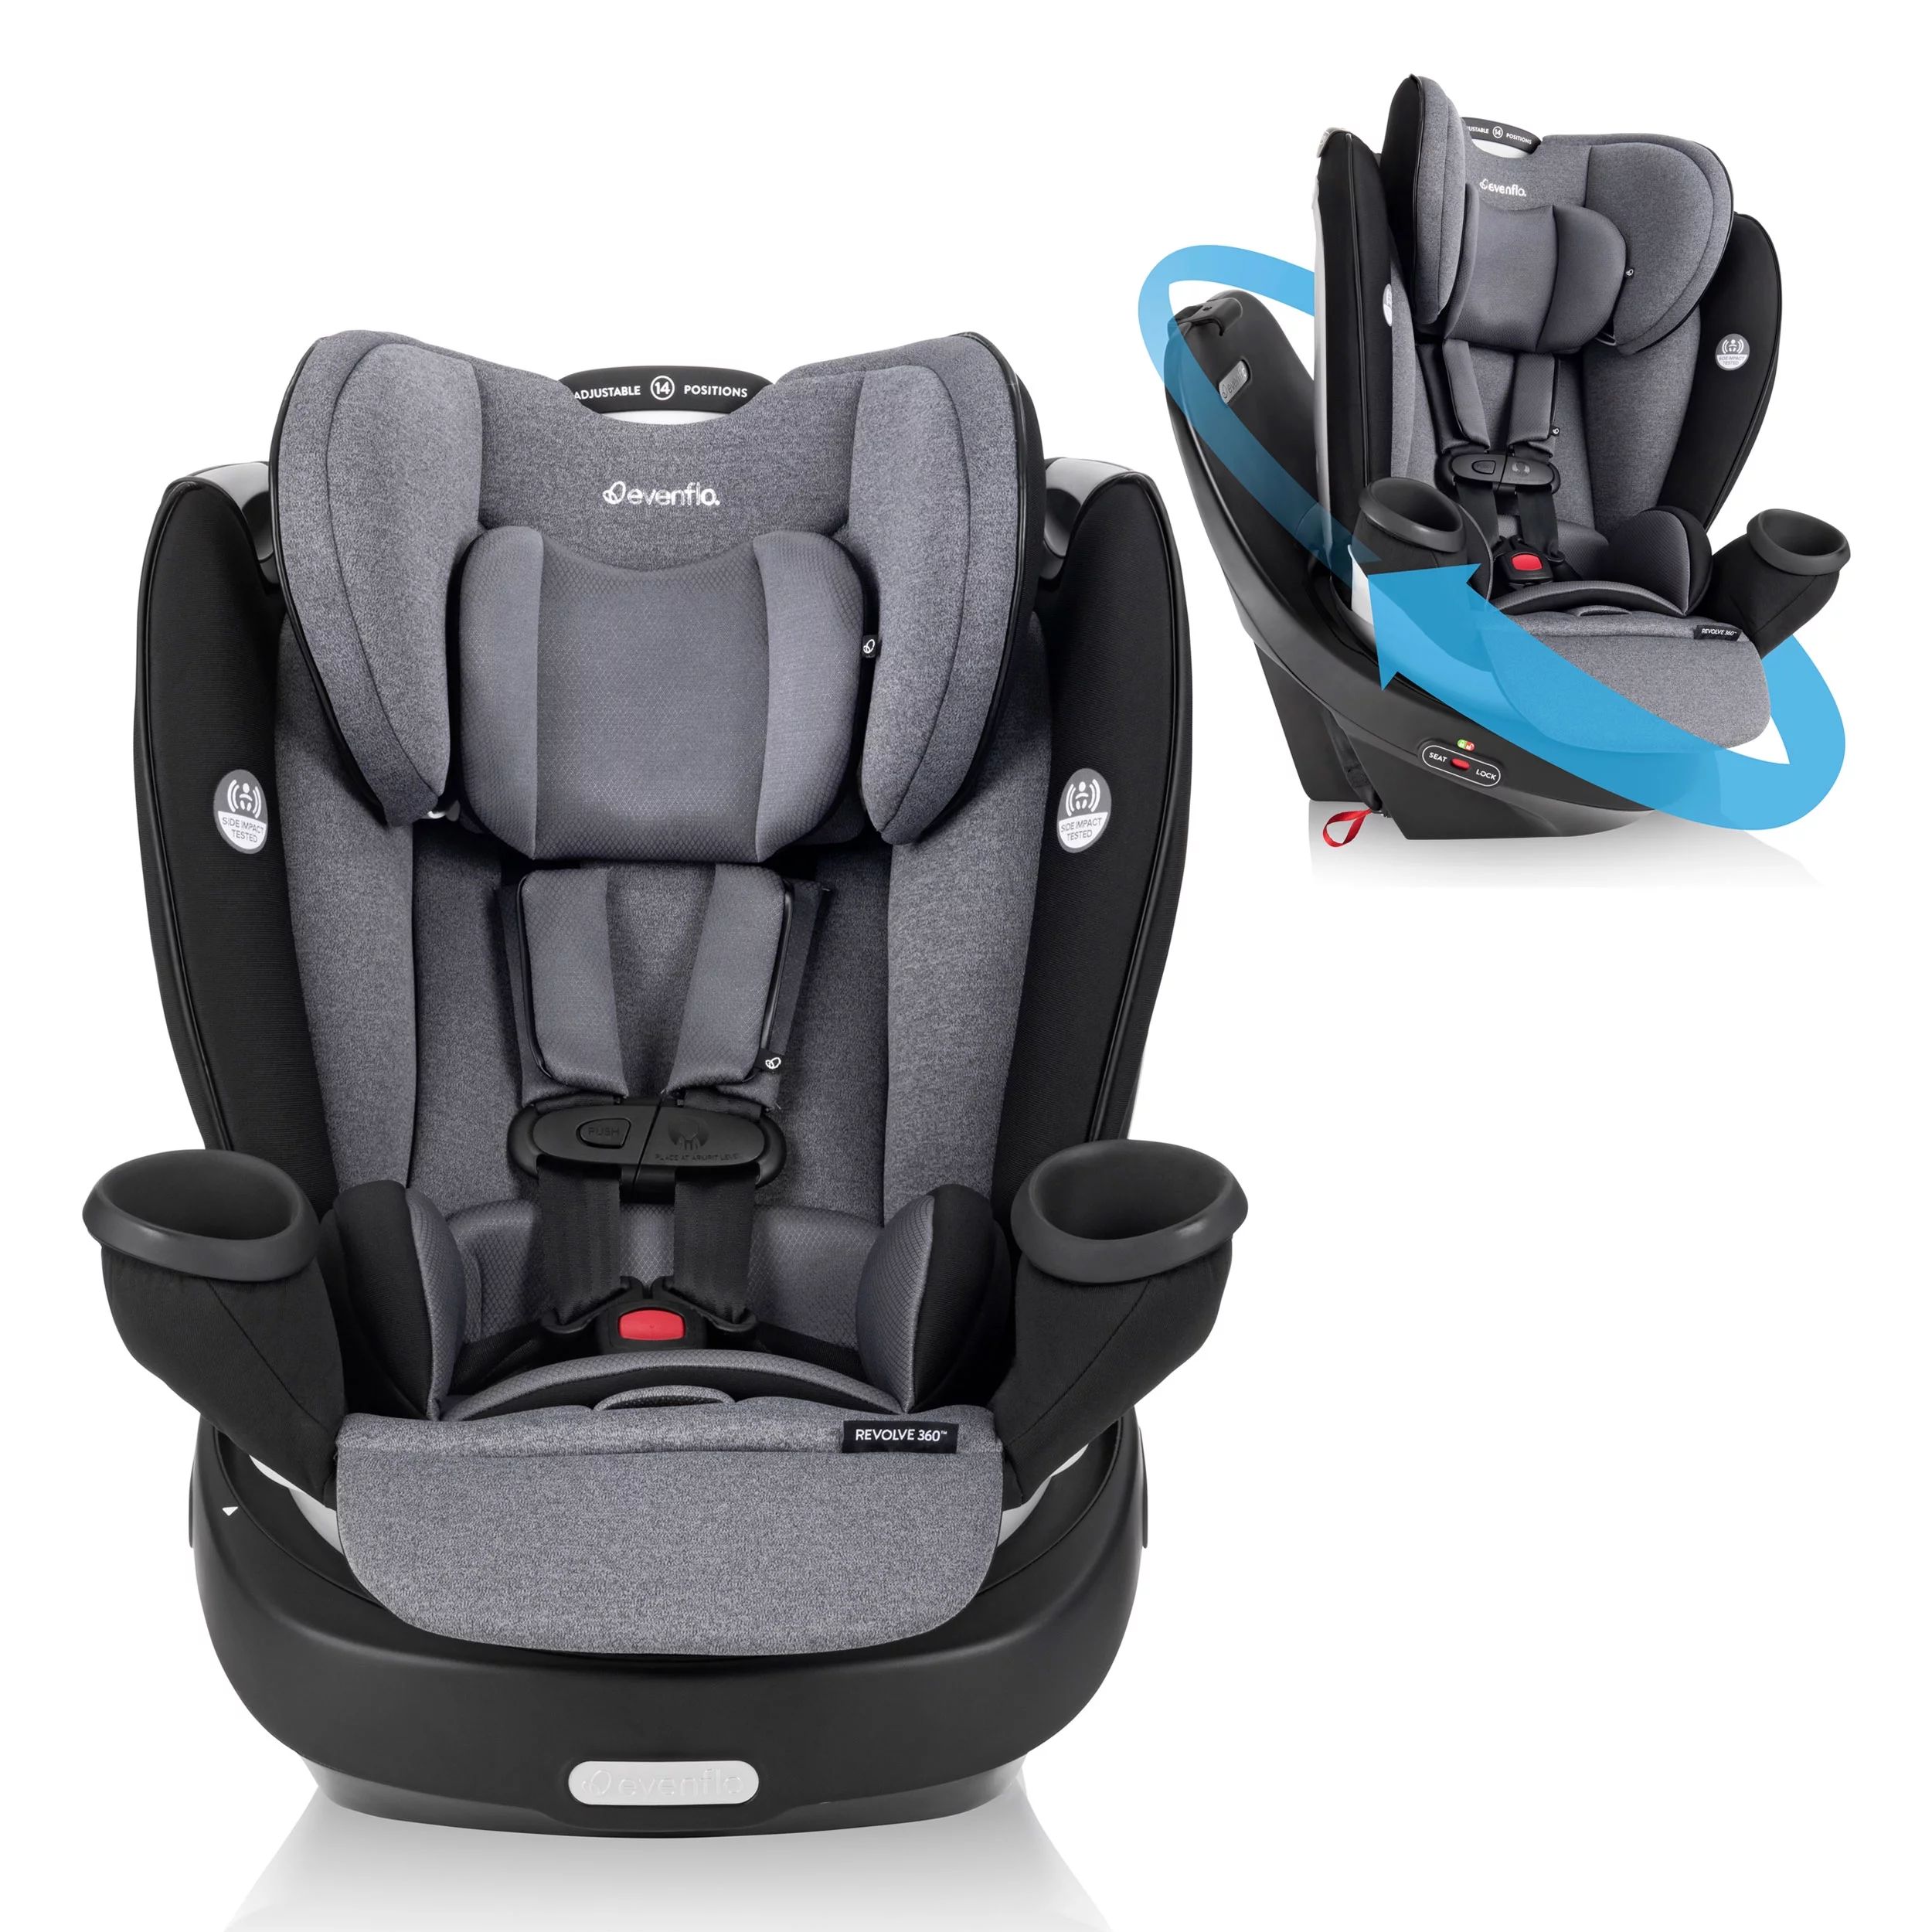 Evenflo GOLD Revolve360 Rotational All-In-One Convertible Car Seat (Moonstone Gray) | Walmart (US)